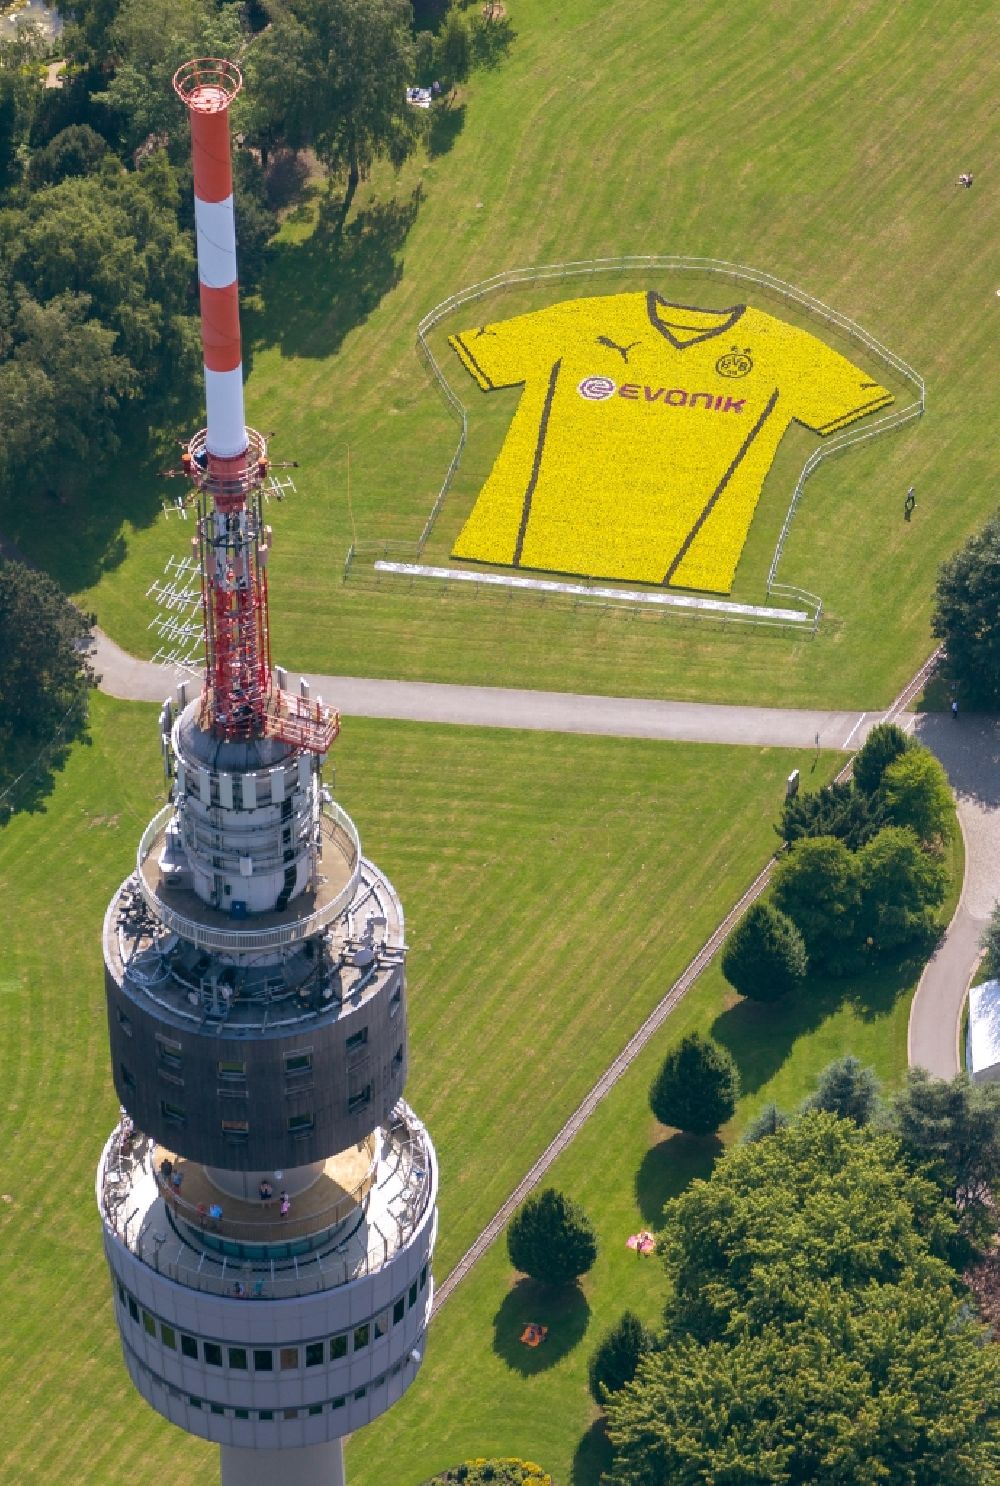 Aerial image Dortmund - Presentation of the new jerseys in Westphalia park with views over the television tower Florian in Dortmund in North Rhine-Westphalia